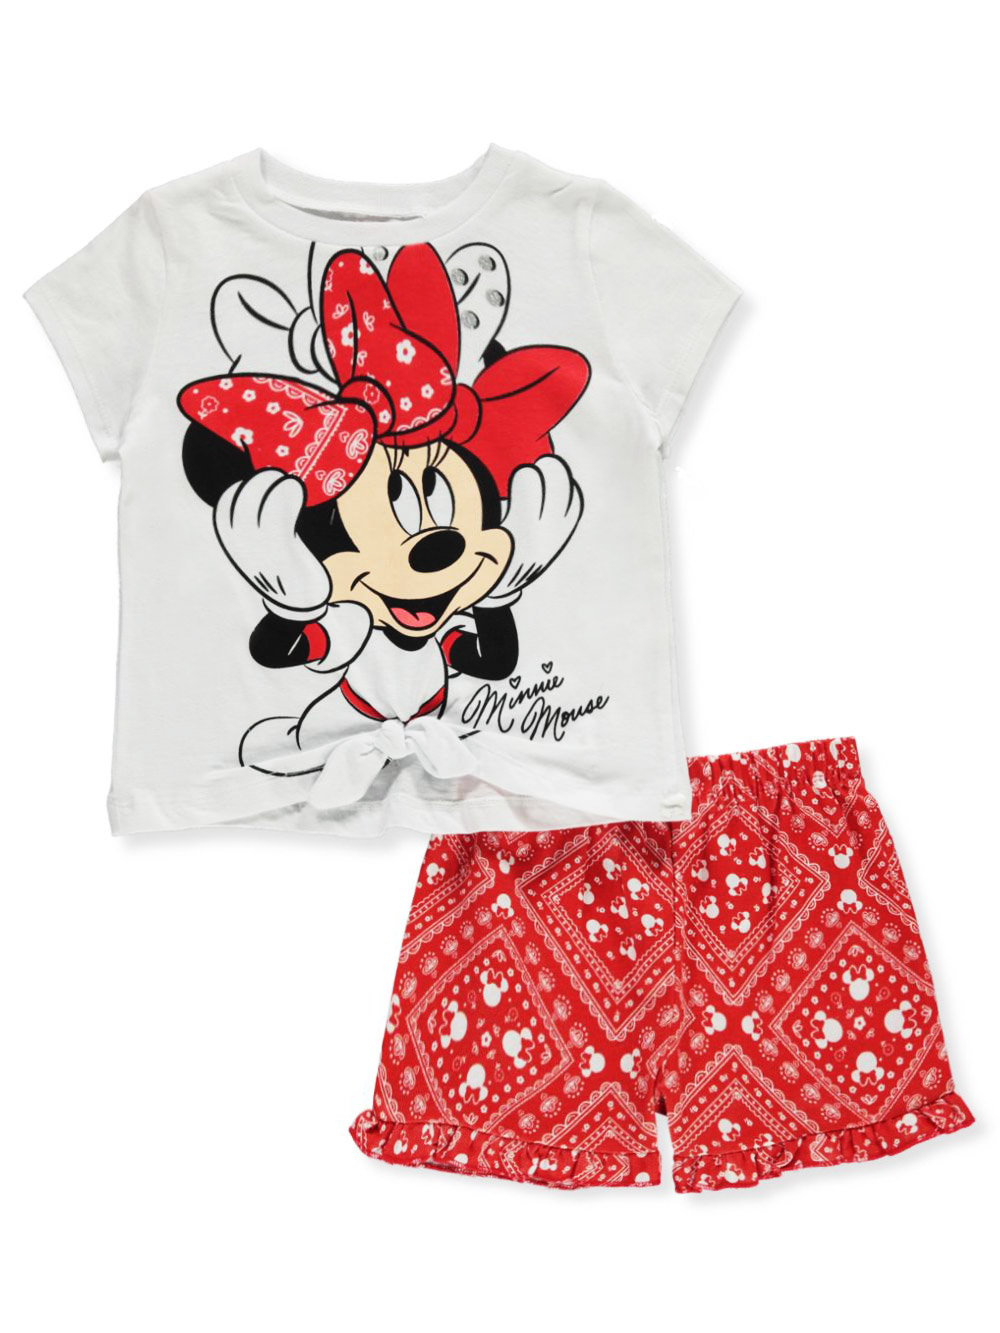 Disney Minnie Mouse Girls' 2-Piece Blush Shorts Set Outfit - white/multi, 4t (Toddler) - image 1 of 3